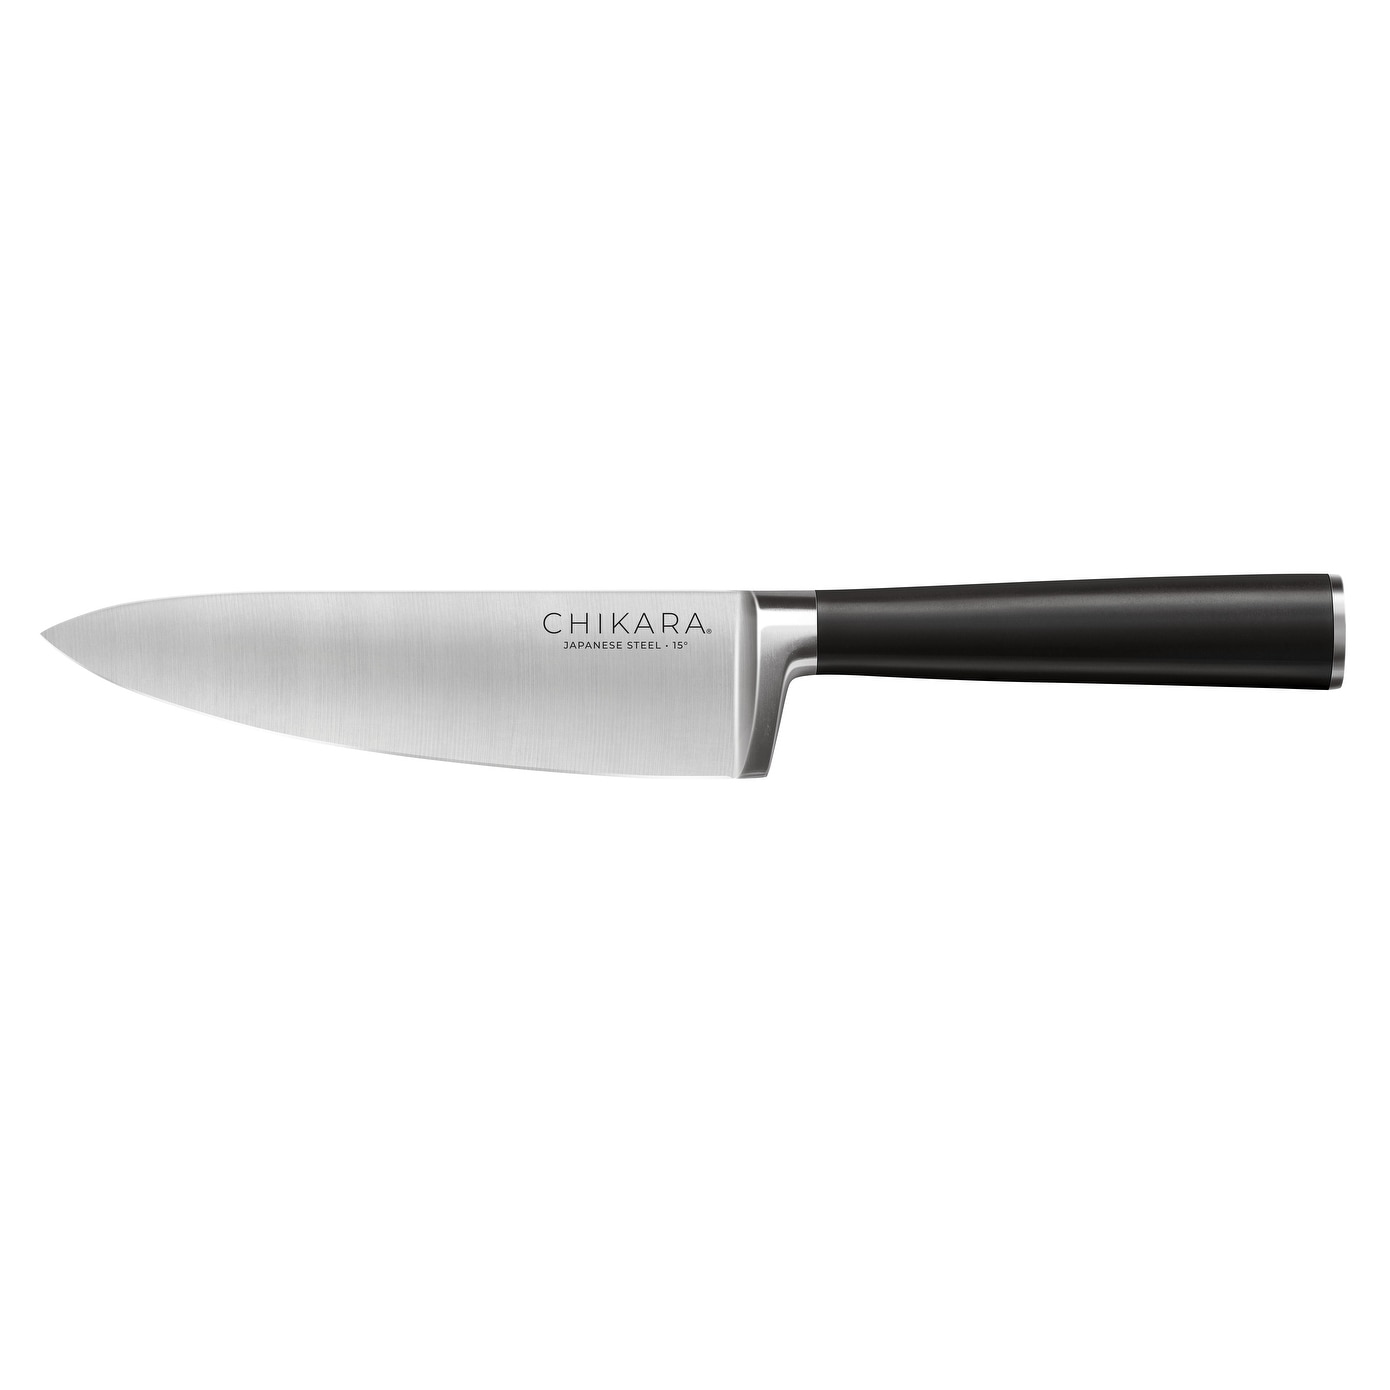 6 in (15 cm) Chef Knife - Stainless Steel